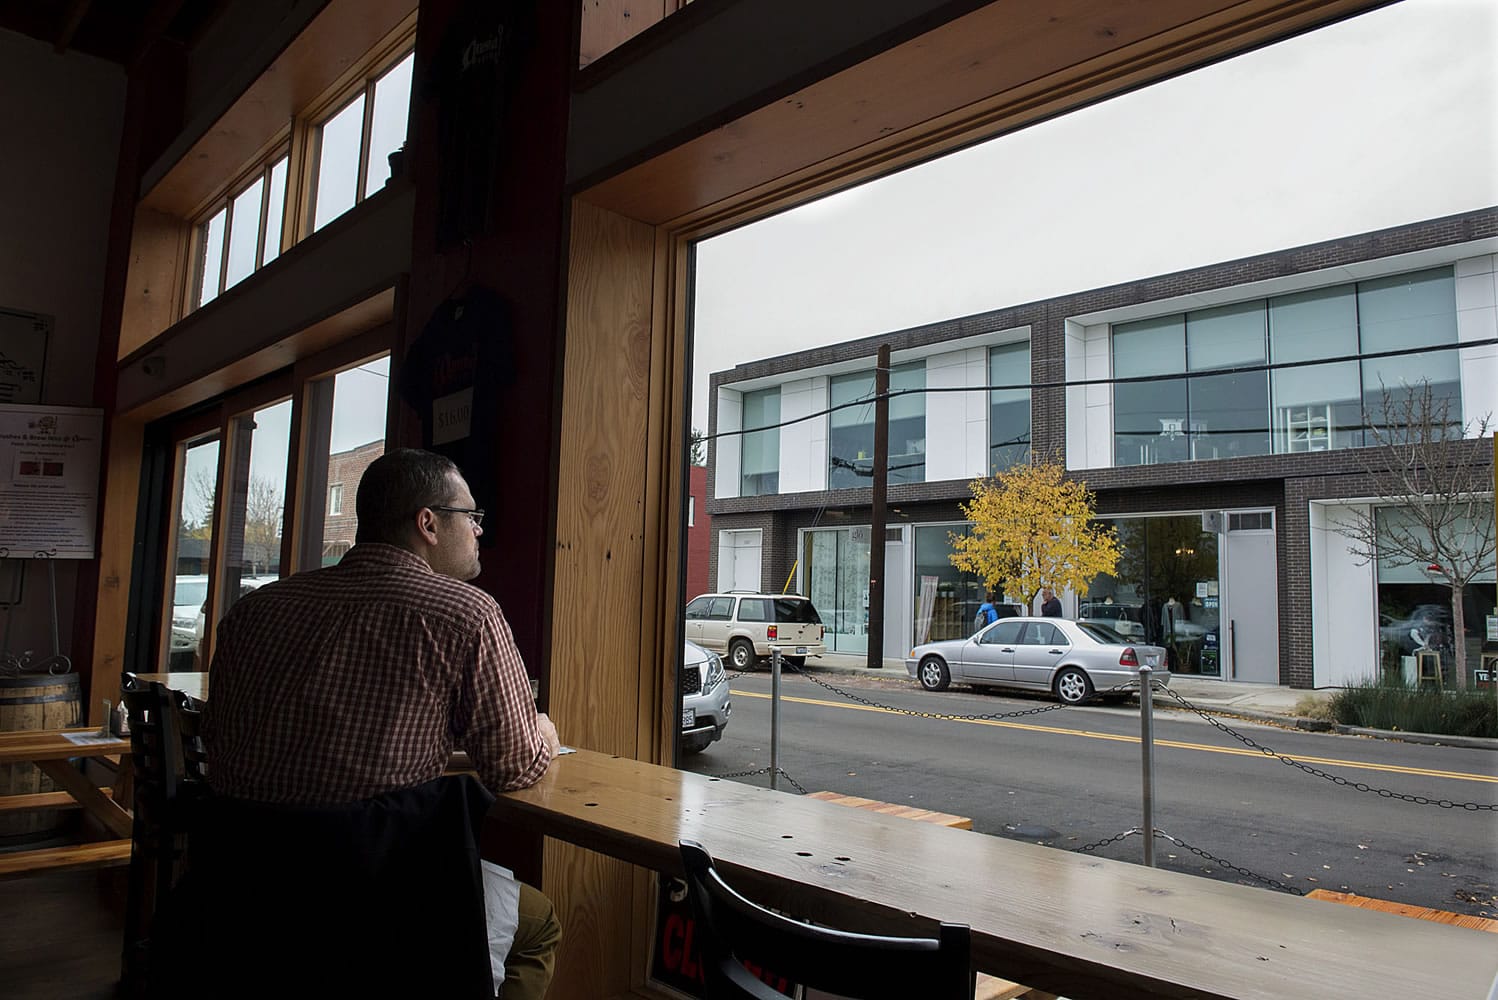 Jeremy Chitwood of Salem, Ore., checks out the view from Amnesia Brewing while enjoying lunch Thursday afternoon in up-and-coming downtown Washougal. A new downtown association is trying to build on the recent success Washougal has had in attracting new businesses and customers.